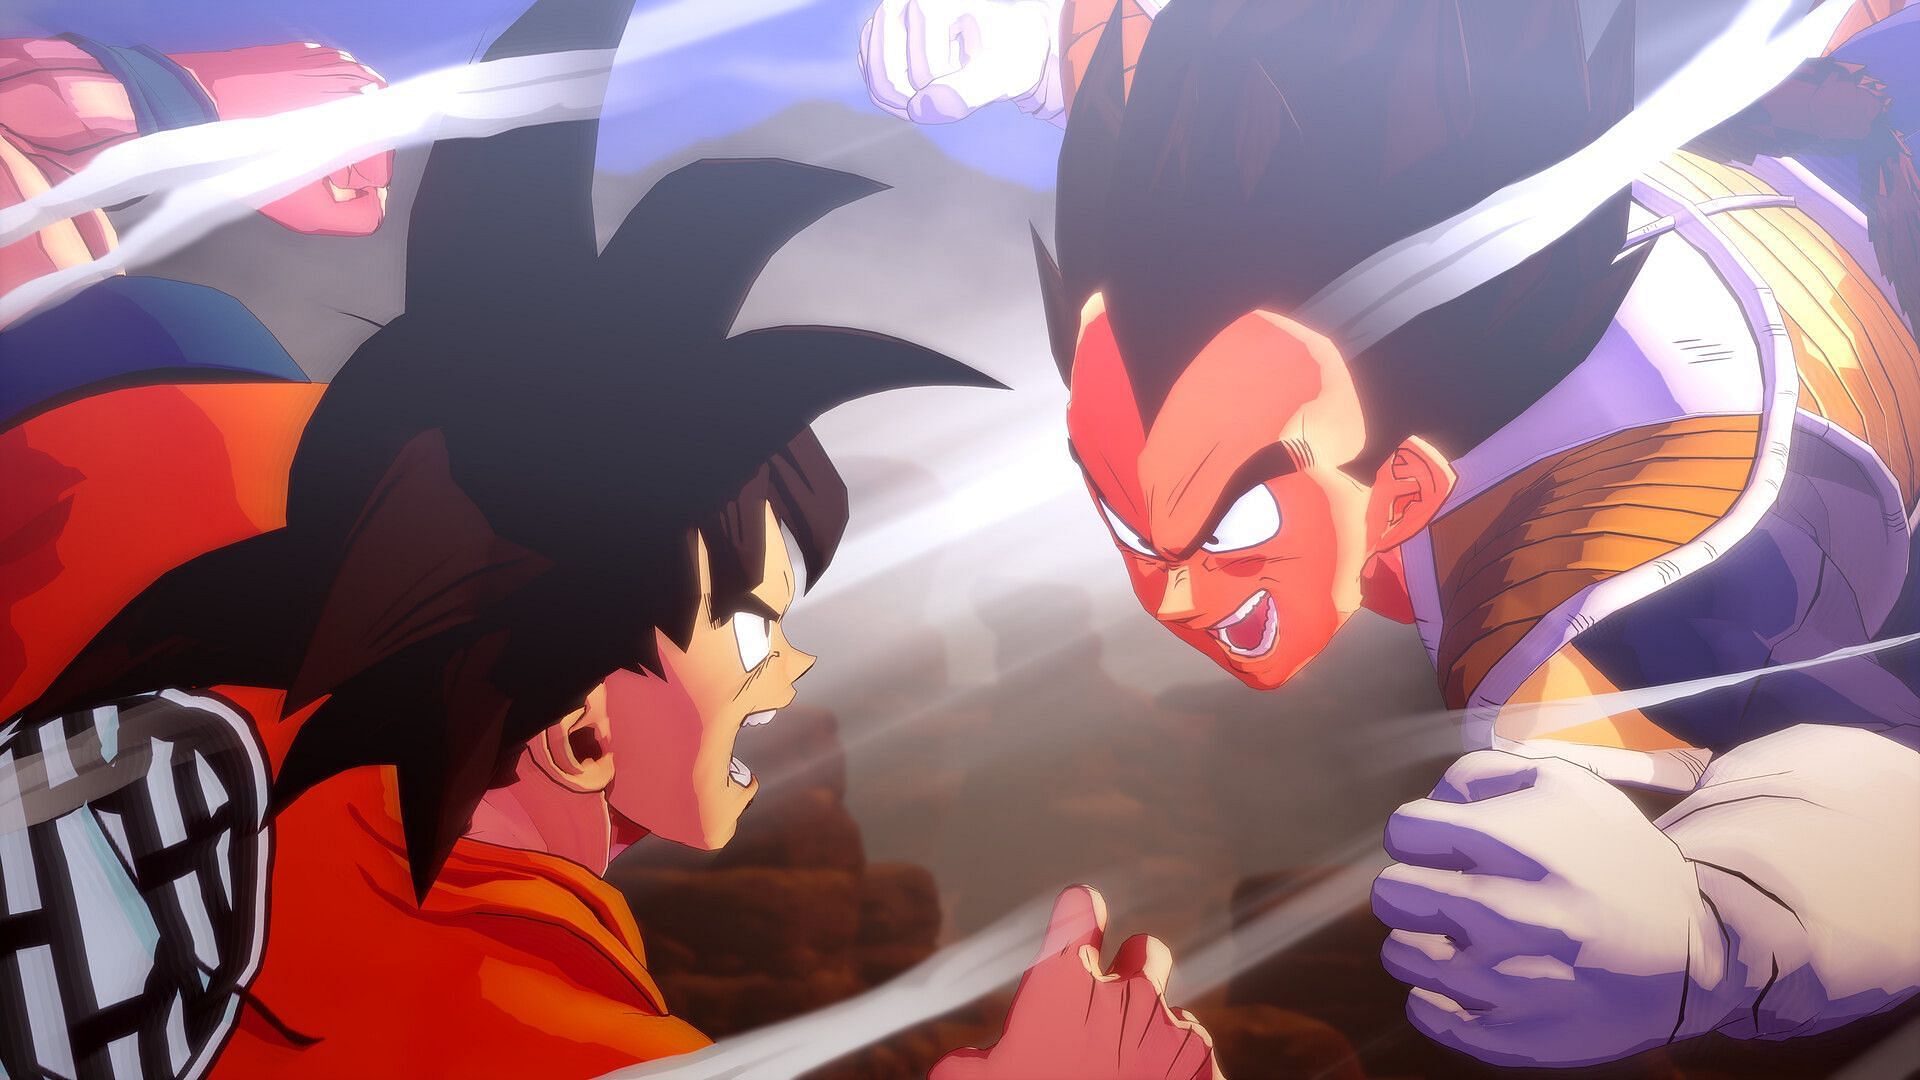 Dragon Ball Z is one of the most iconic anime series (Image via CyberConnect2 Co. Ltd.)